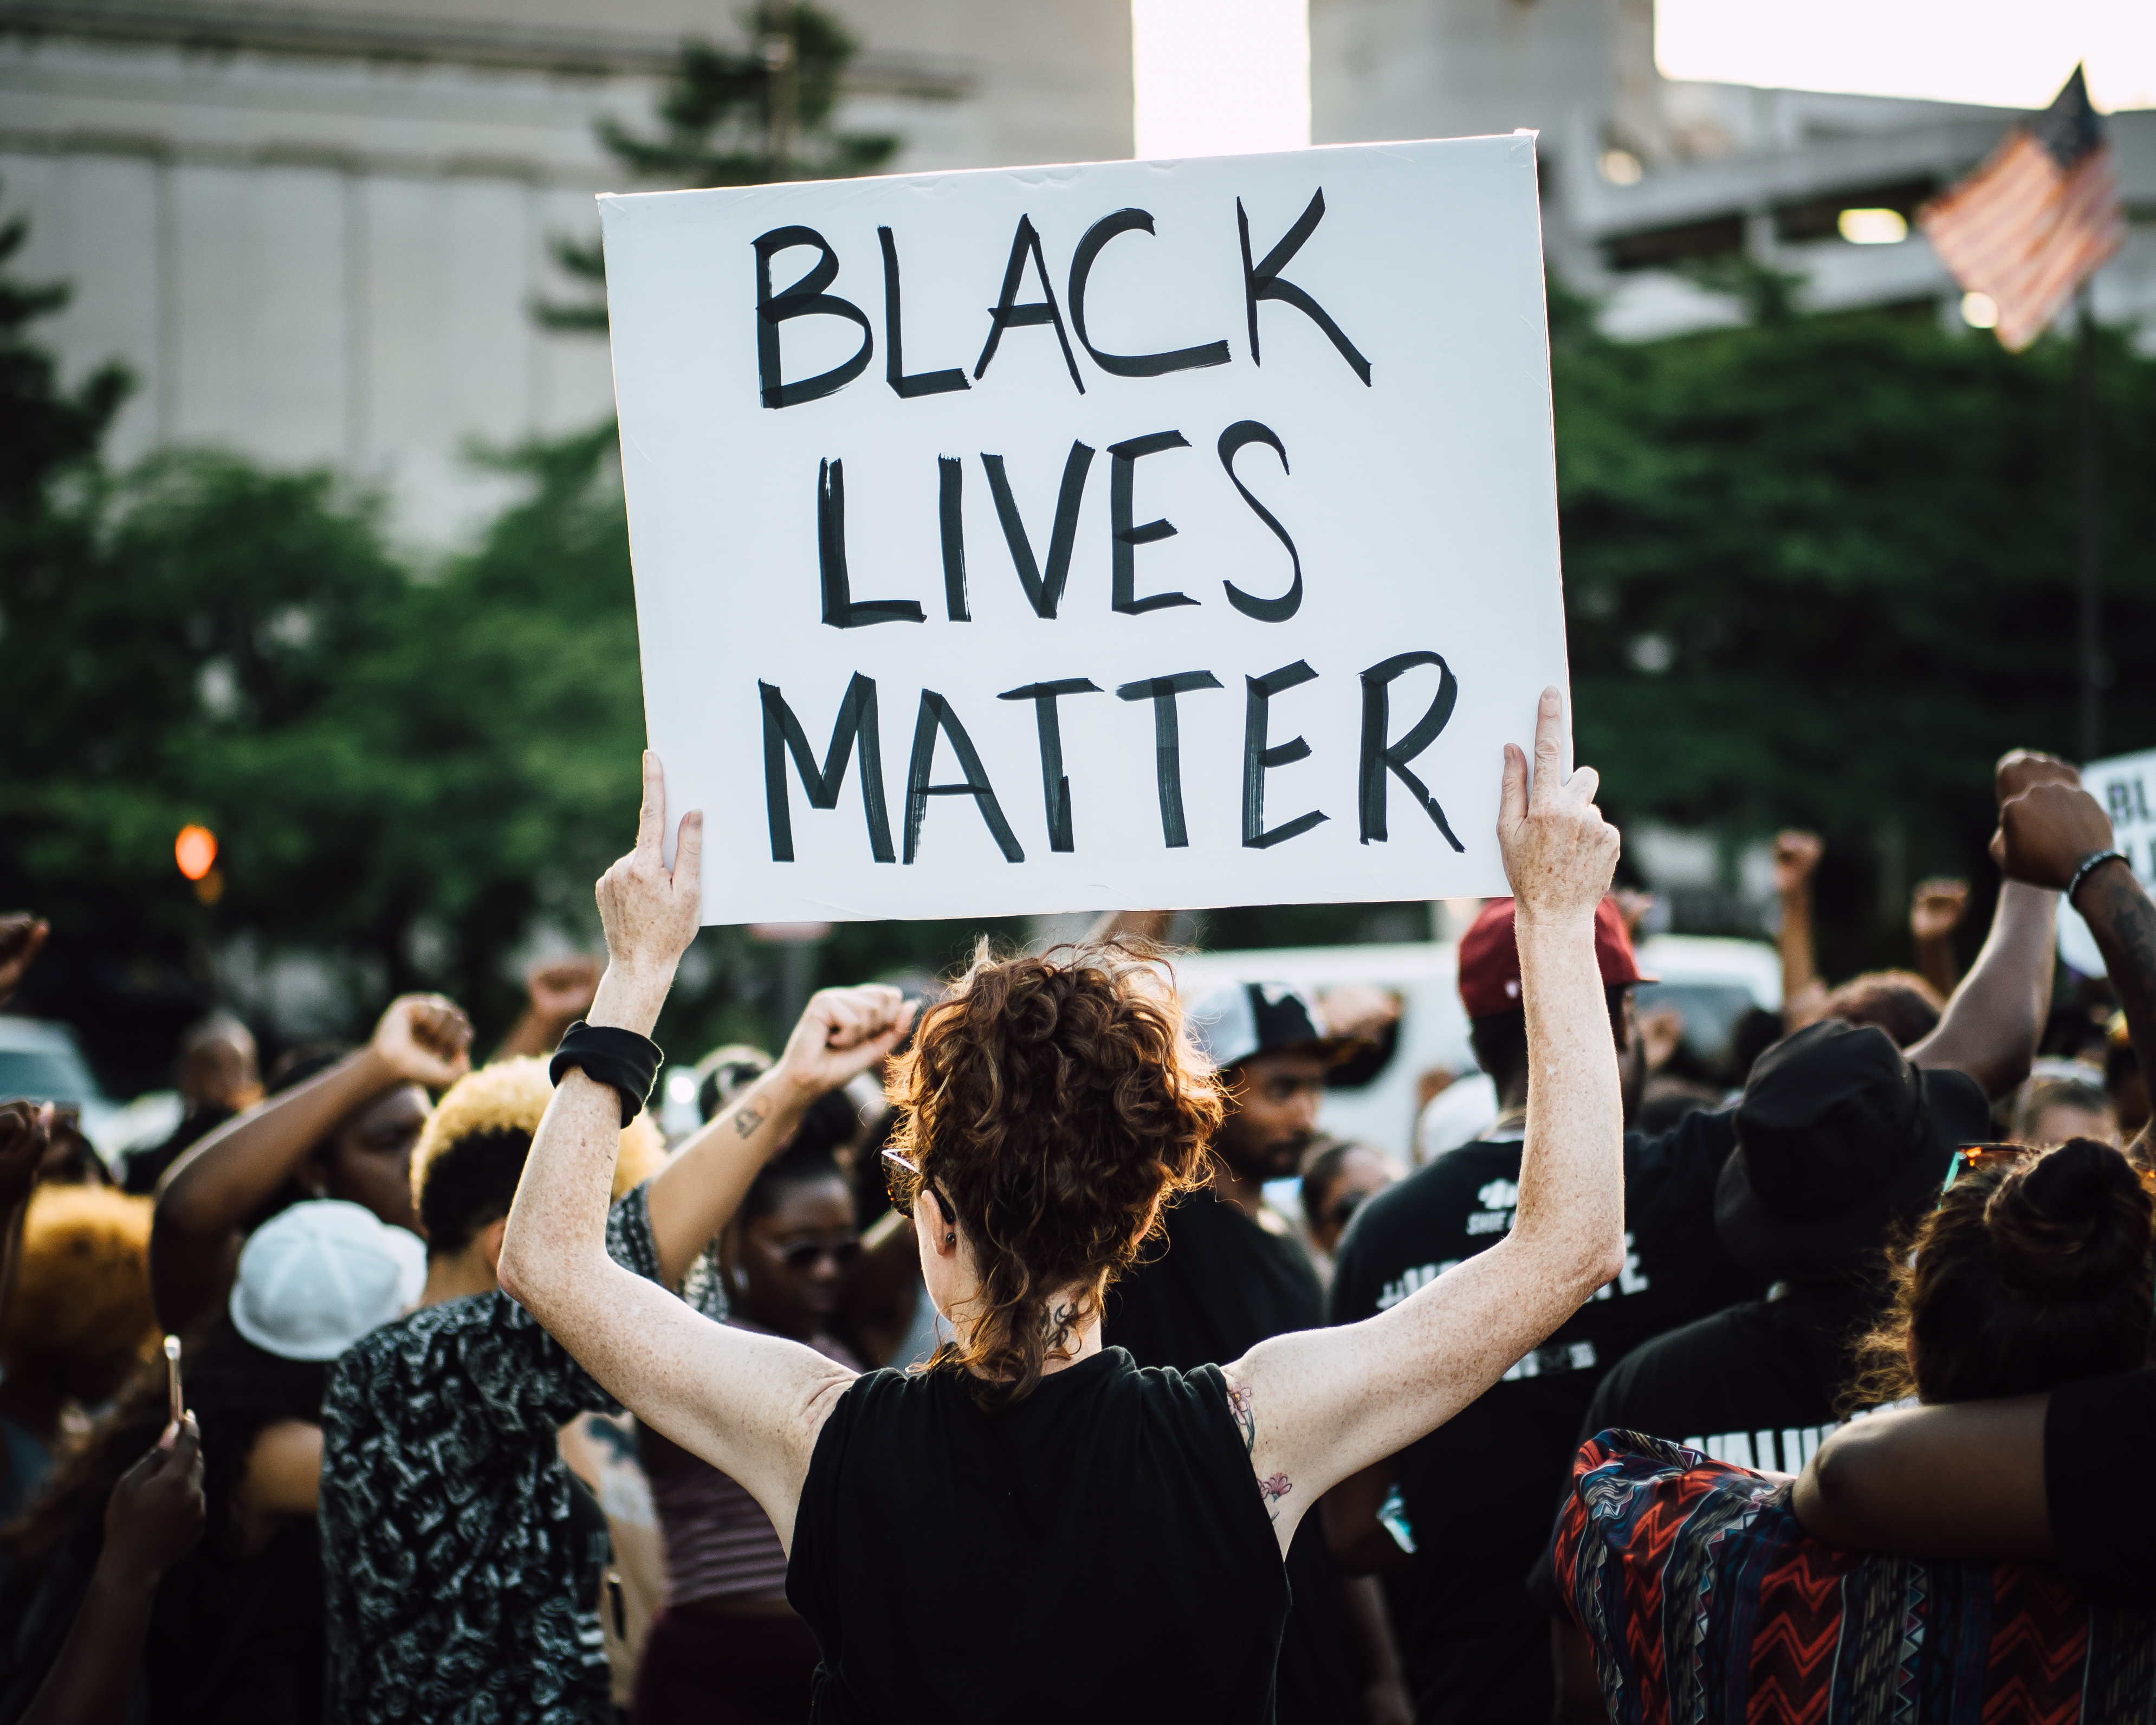 COVID-19 and Black Lives Matter Protests: Local Government Responses Restrict Rights, Increase Risk